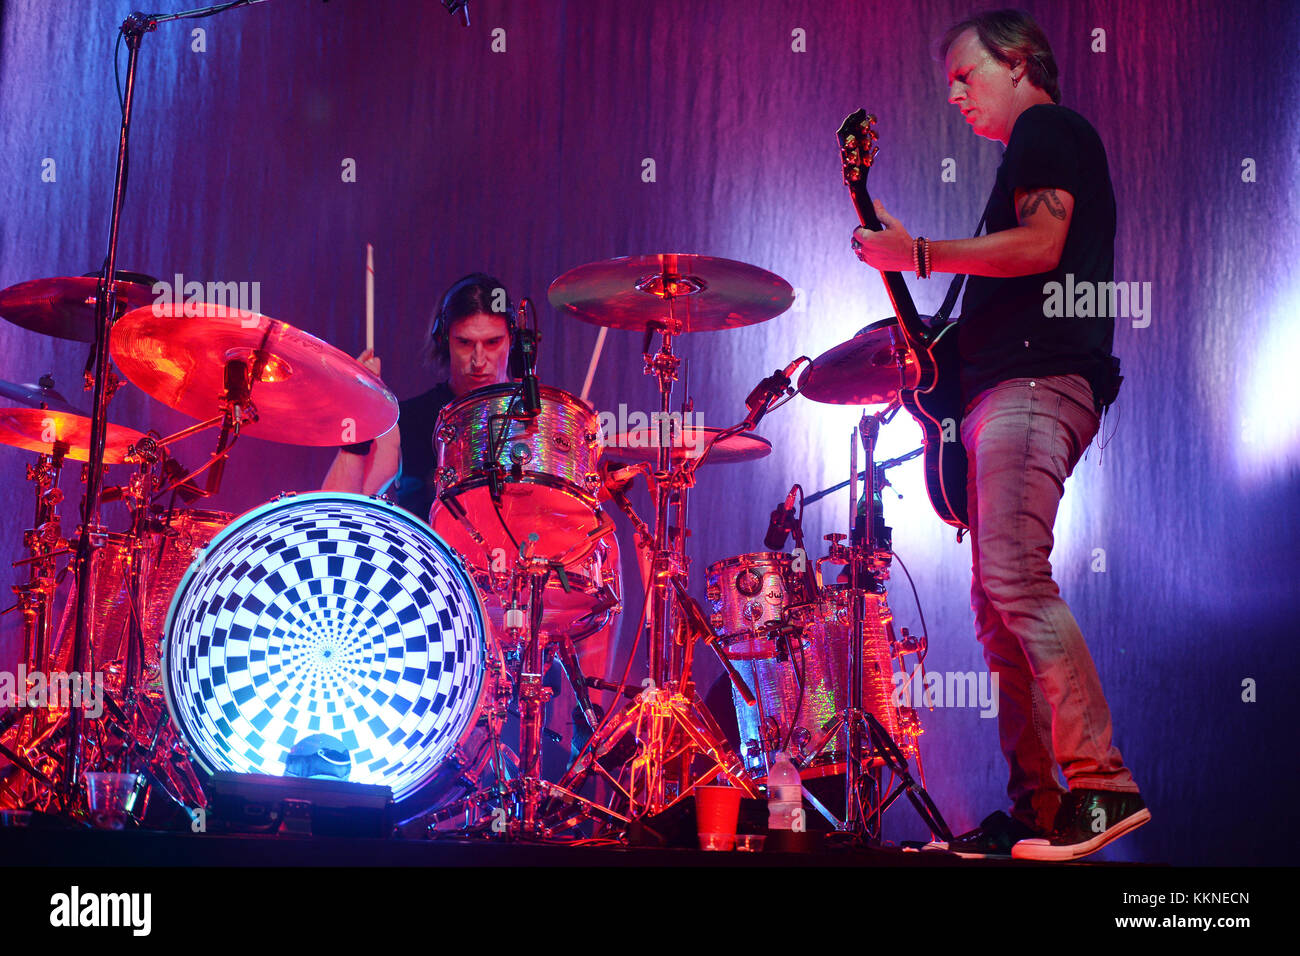 HOLLYWOOD FL - August 11: Jerry Cantrell of Alice In Chains performs at Hard Rock Live held at the Seminole Hard Rock Hotel & Casino on August 11, 2015 in Hollywood, Florida  People:  Sean Kinney, Jerry Cantrell Stock Photo